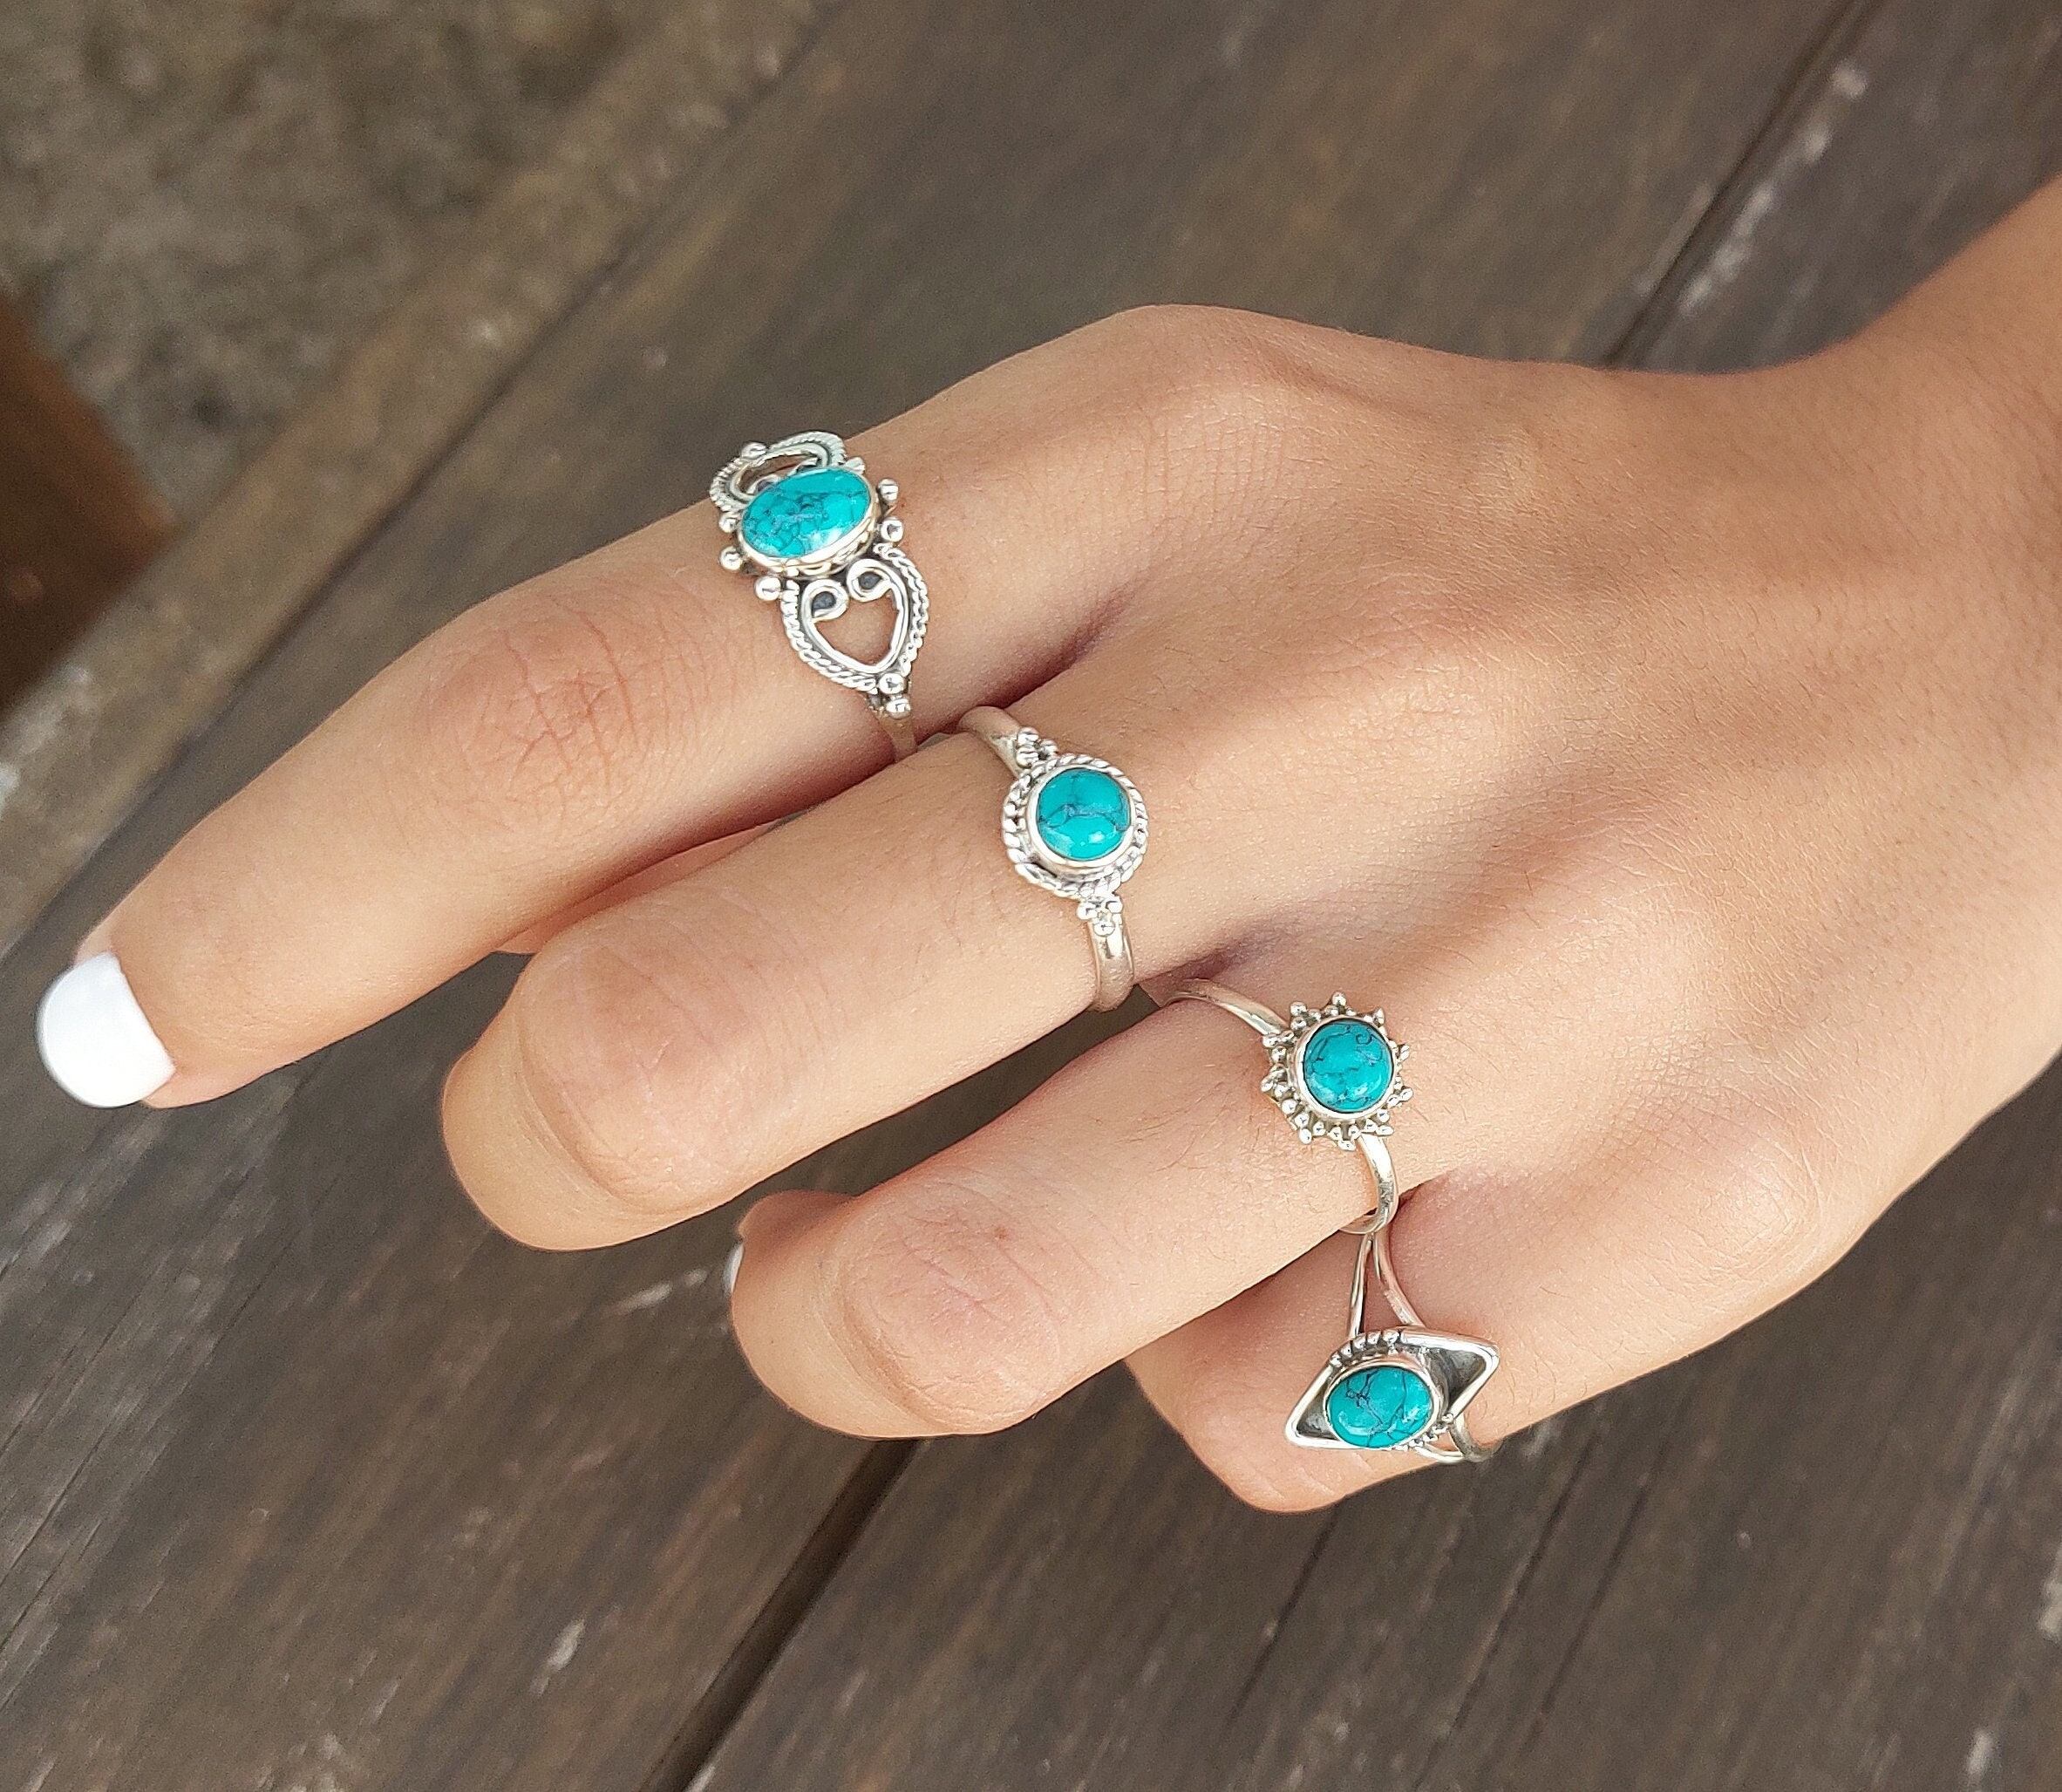 Statement Rings For Women Unique Handmade Artisan Jewelry Boho Ring Turquoise Sterling Silver Ring